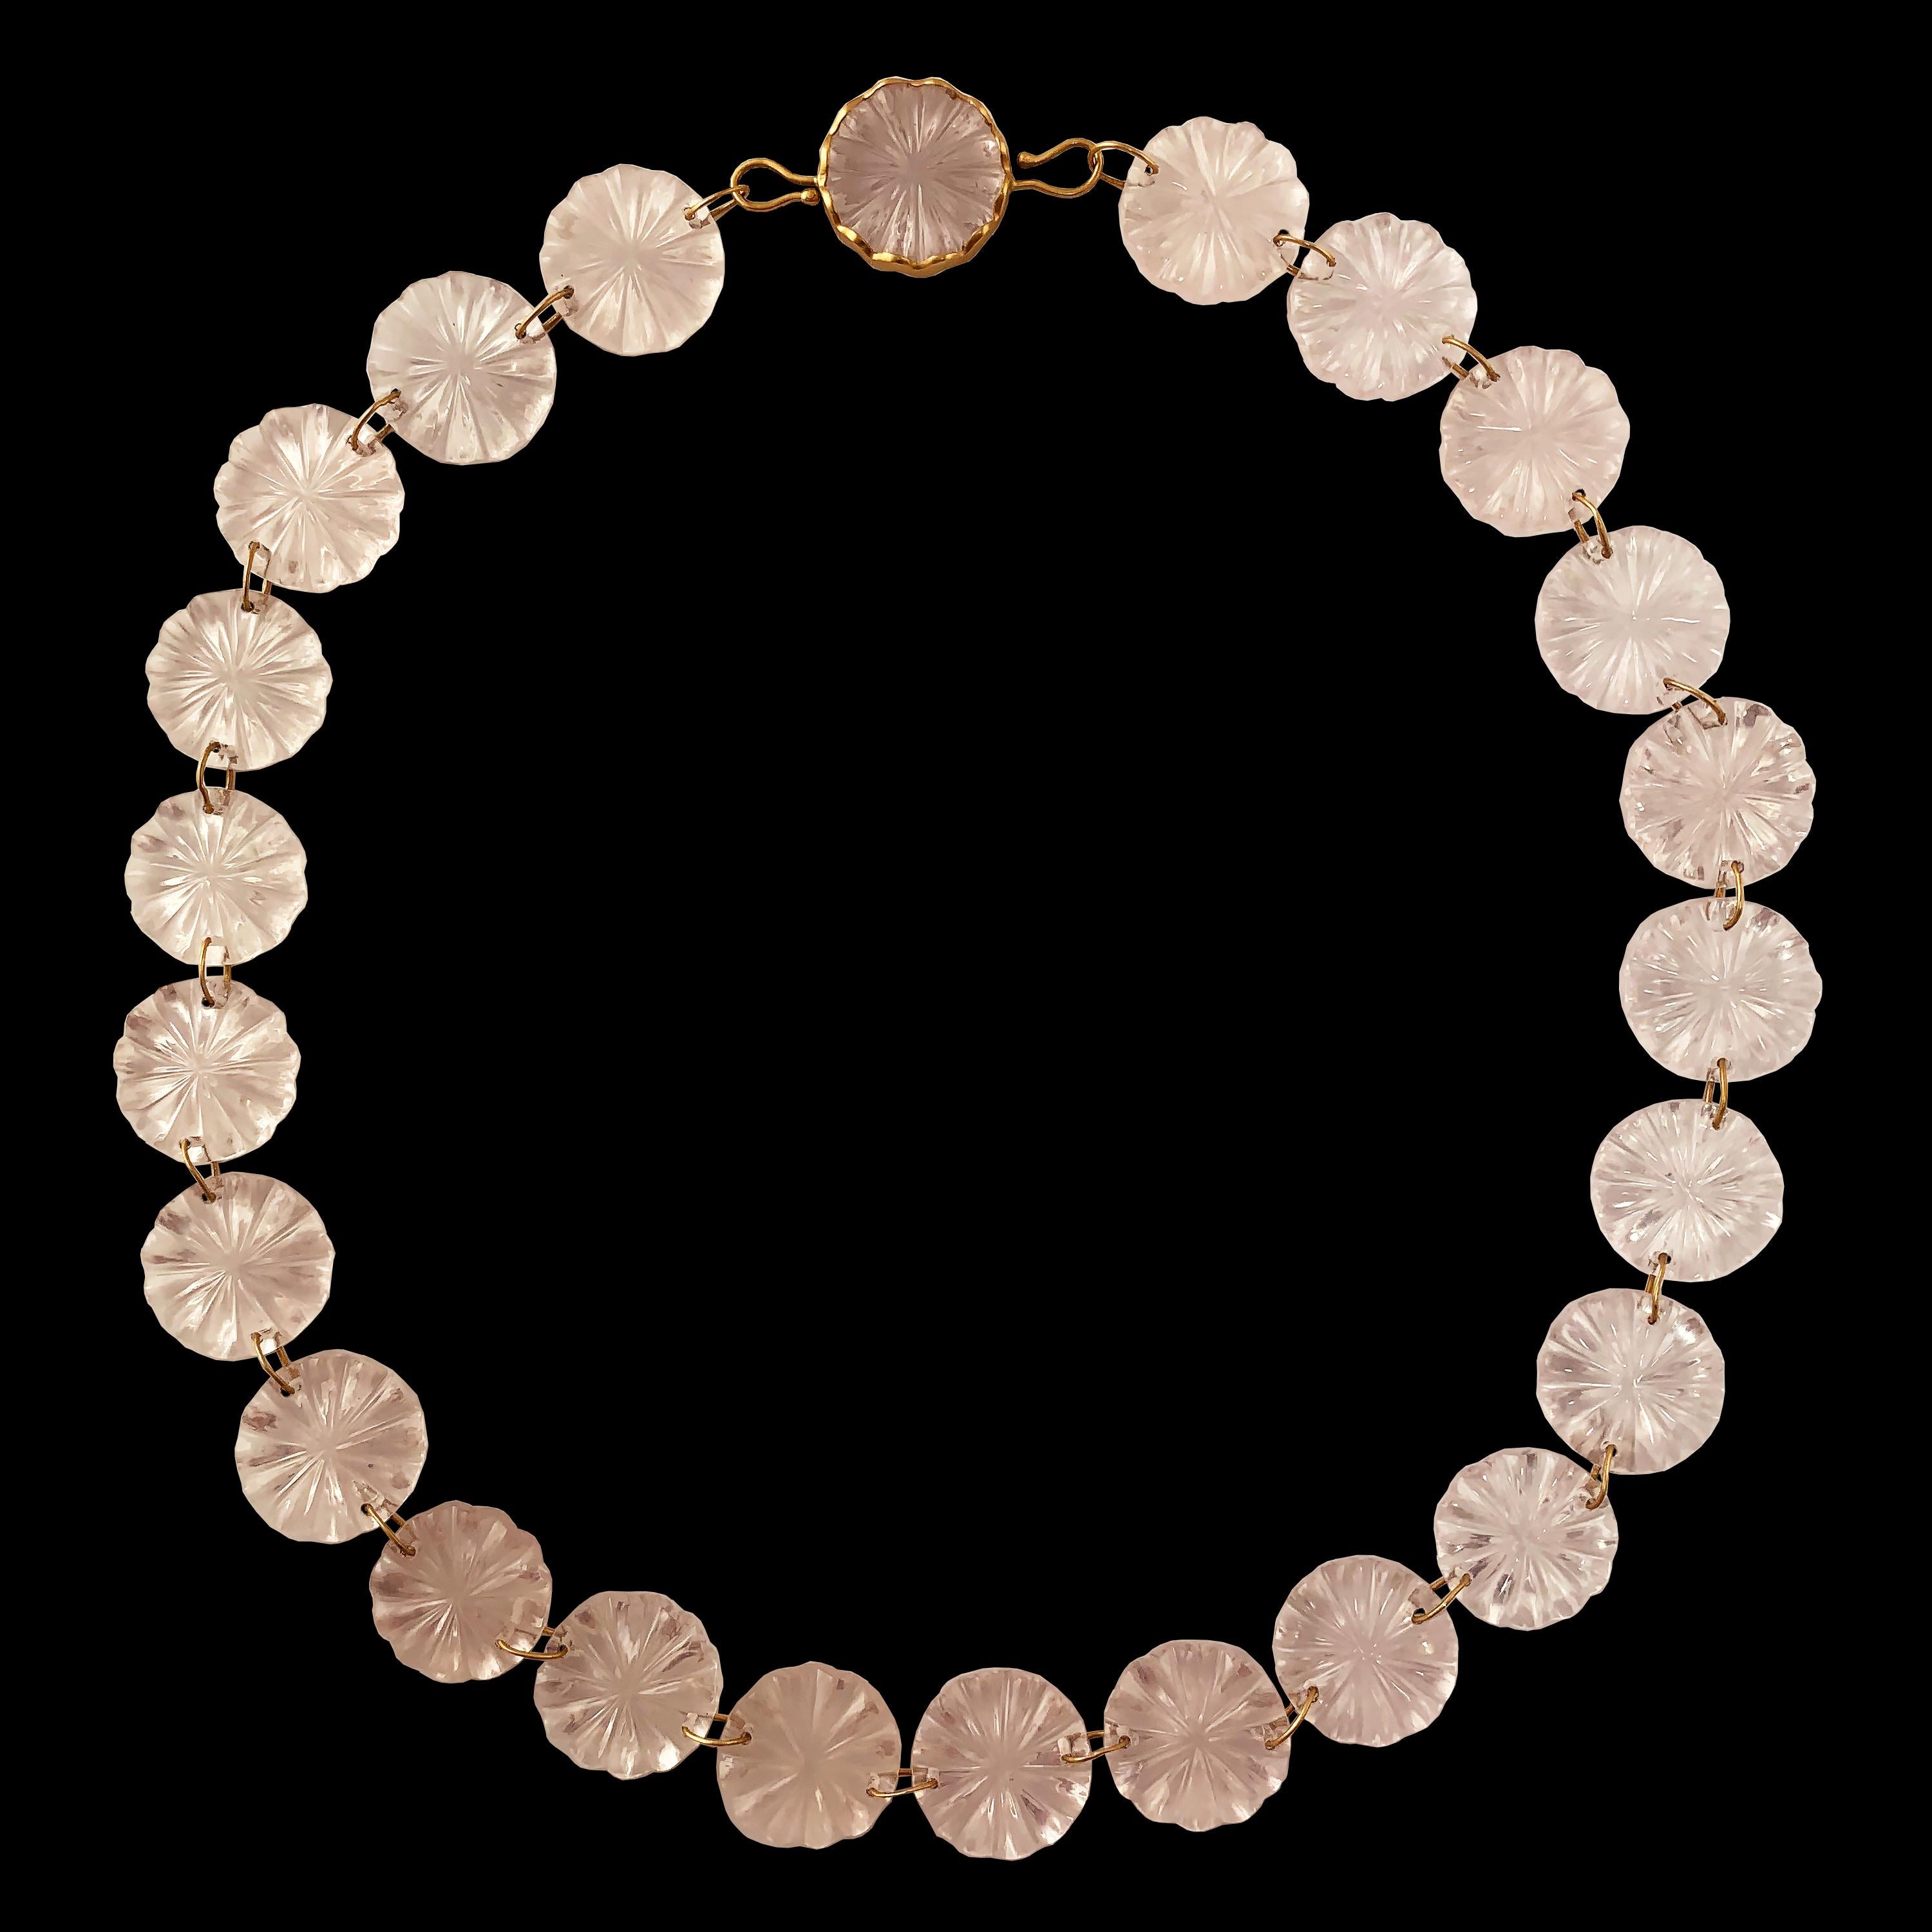 A dreamy necklace made of 240 carats of hand carved Rose Quartz discs.  Made as part of Ico & the Bird's 'Ocean Collection,' the necklace is composed of jump rings connecting the discs and completed with a disk set in a wavy bezel with a hook